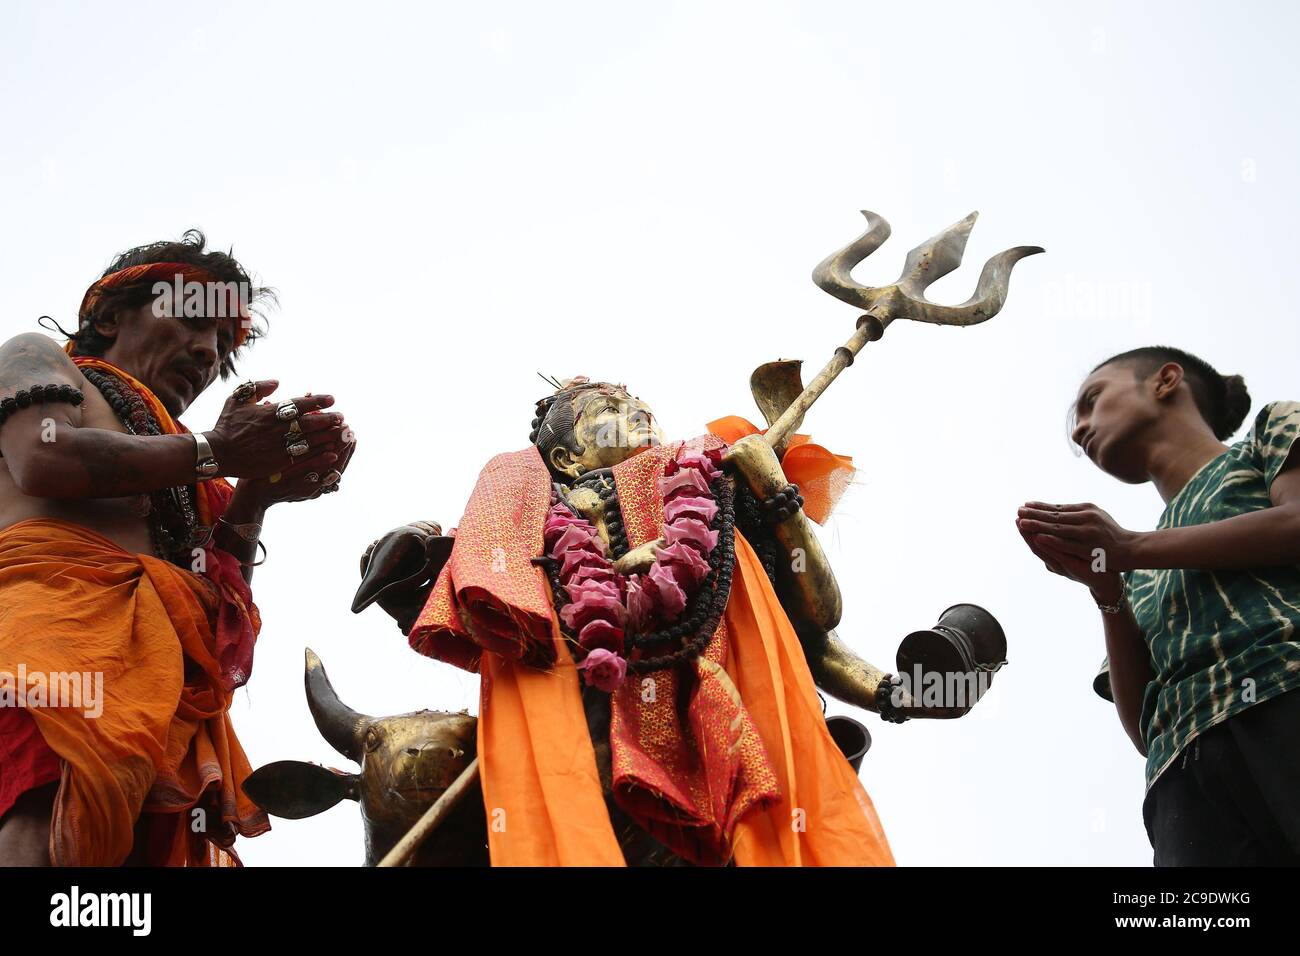 Kathmandu, Nepal. 30th July, 2020. Devotees offer prayers to idol of Lord Shiva at Shiva temple during the holy month of Shrawan. Shrawan month is considered as the holiest month of the year to offer prayers to Lord Shiva for happiness and prosperity. (Photo by Archana Shrestha/Pacific Press) Credit: Pacific Press Media Production Corp./Alamy Live News Stock Photo